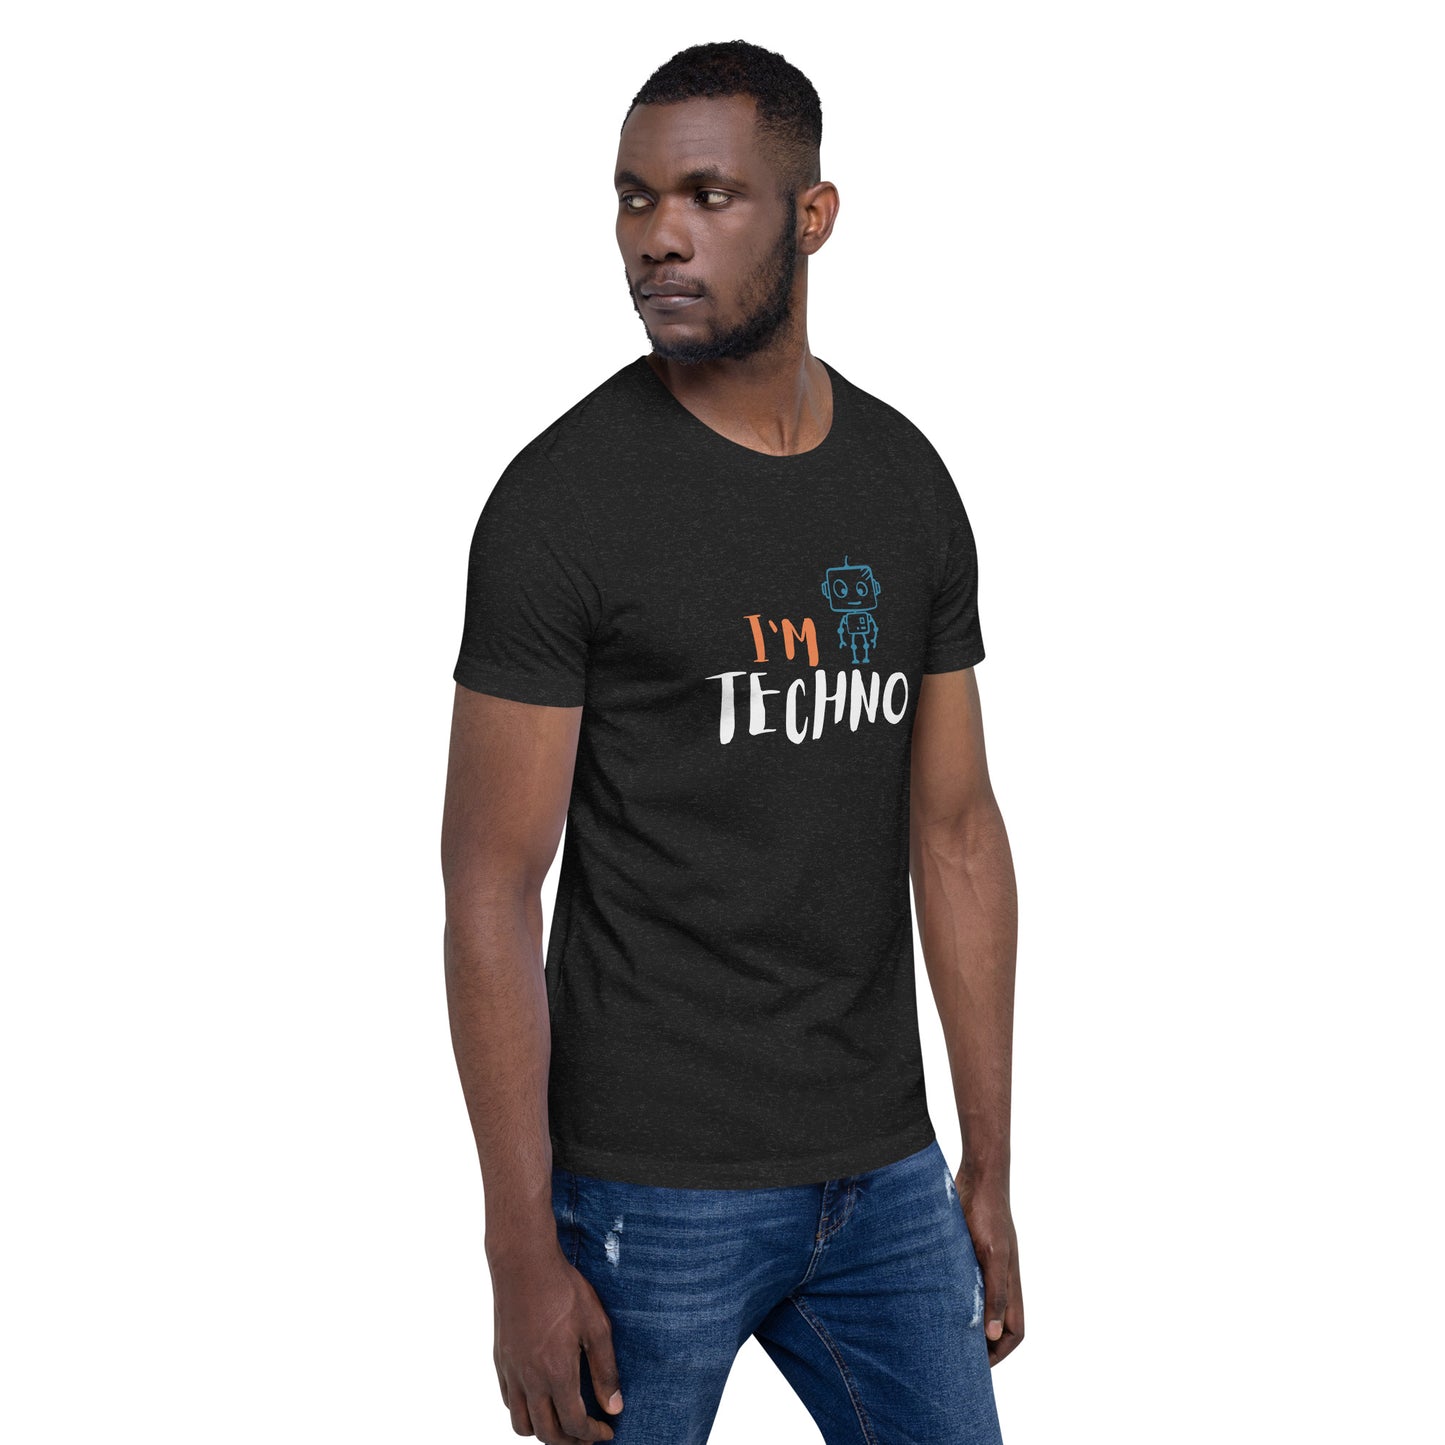 I'M TECHNO T-Shirt (available in multiple colors)